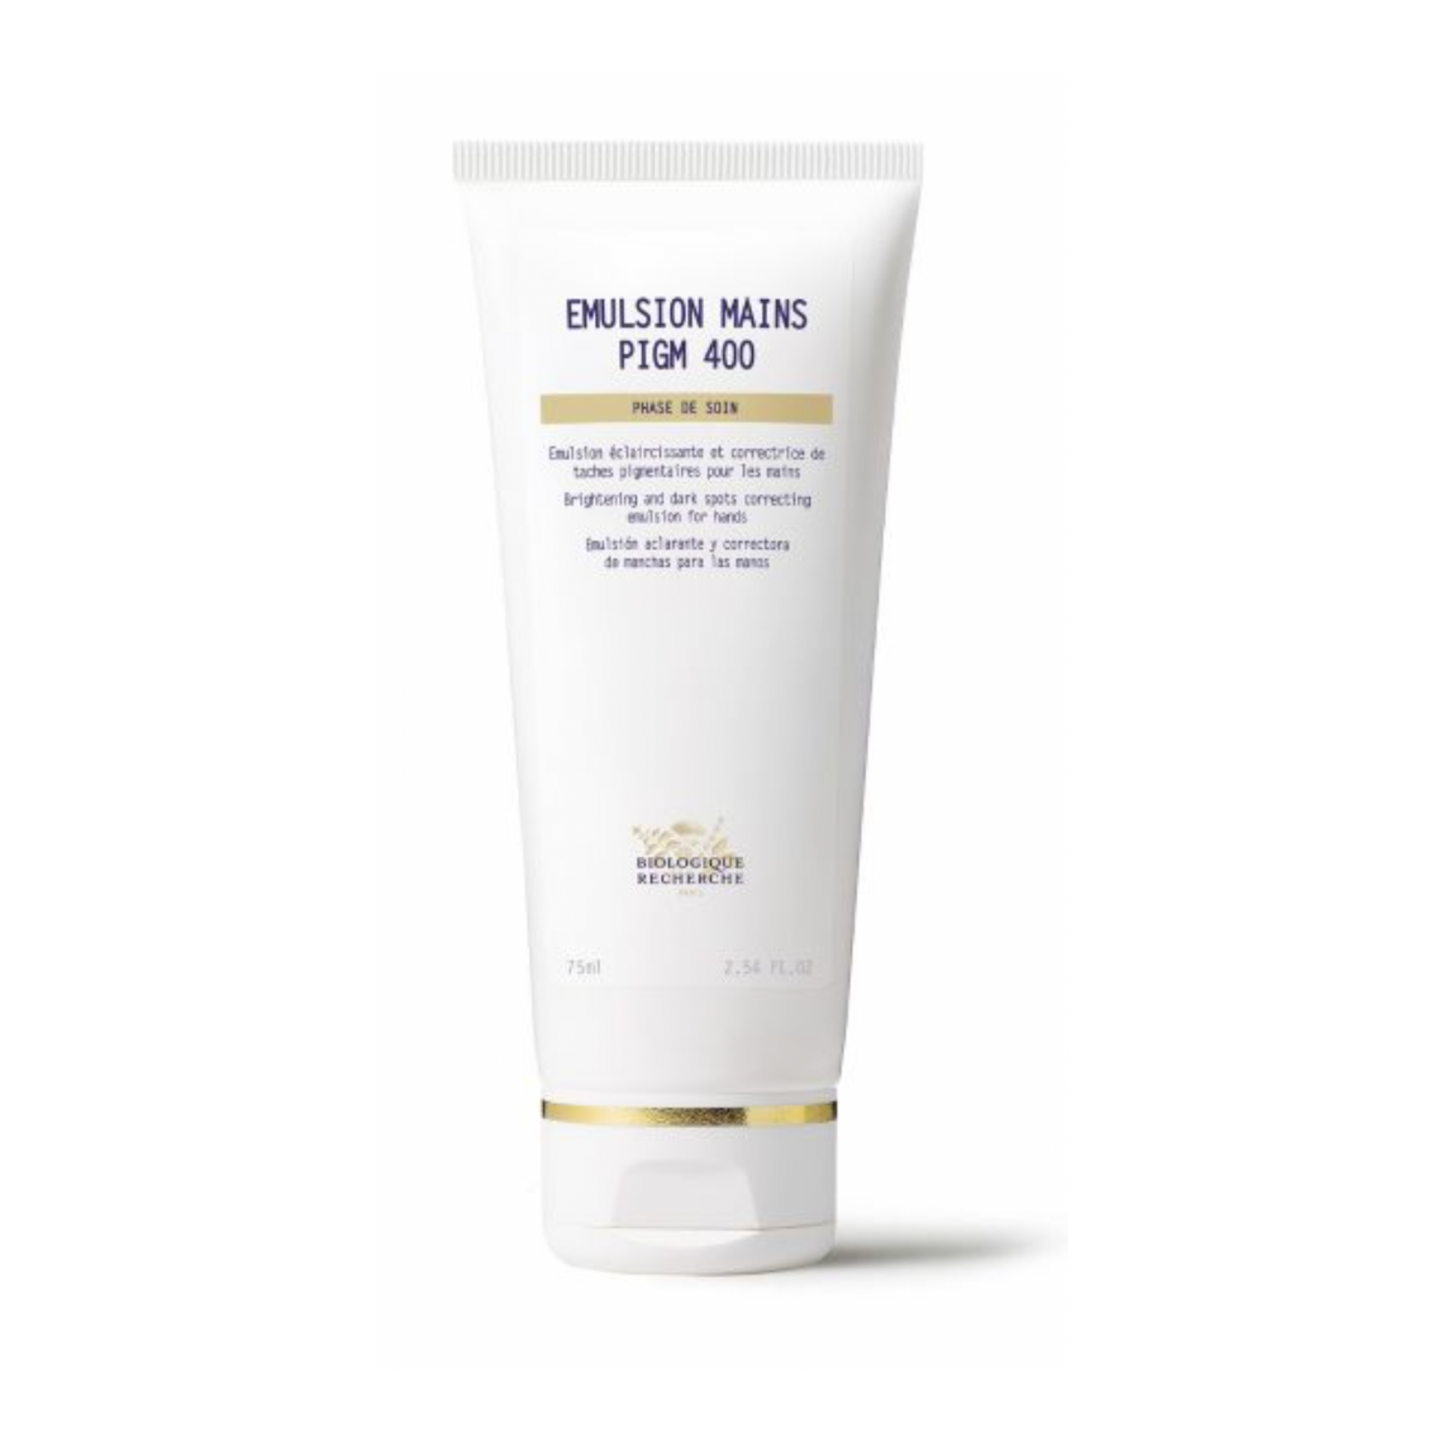 Emulsion Mains PIGM 400: Hand Cream for Pigmented and Sun Damaged Hands